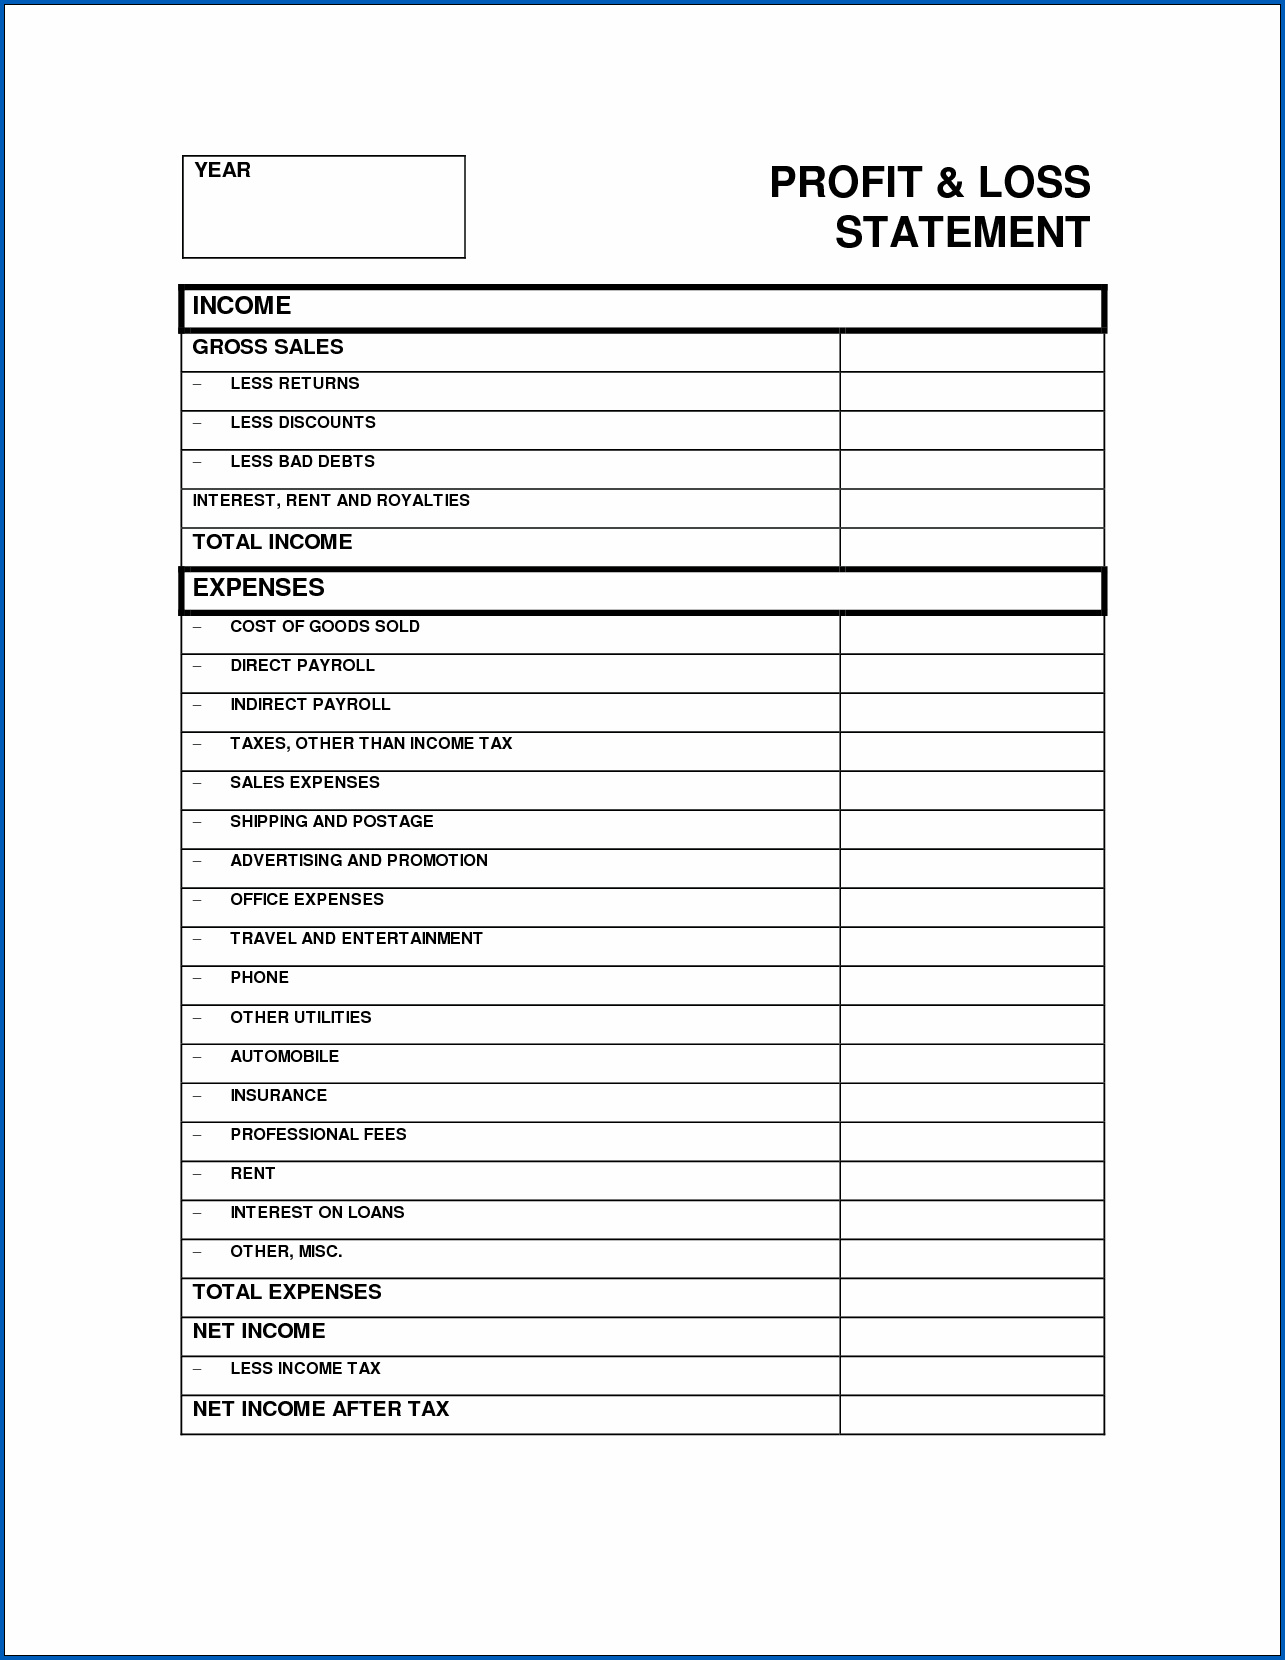 personal-profit-and-loss-statement-template-free-for-your-needs